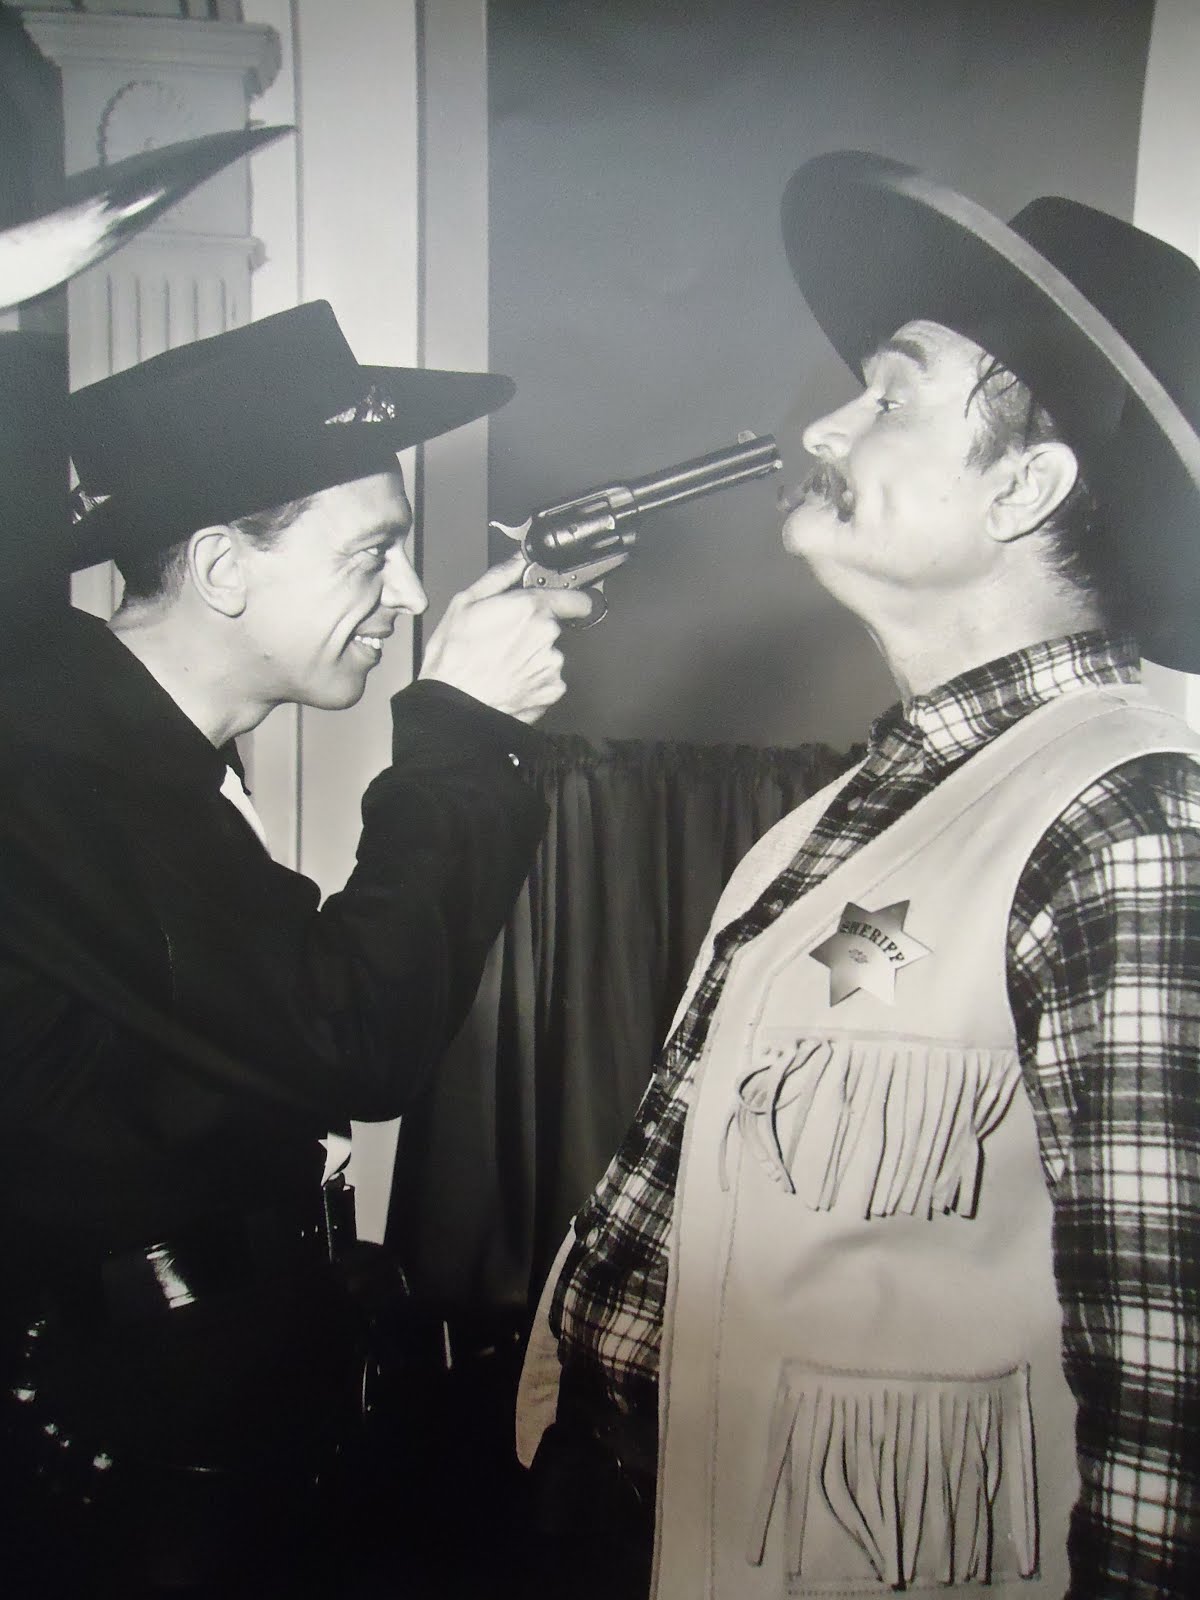 In Deadeye and the Gunslinger, A hired gun is needed to stop holdups in a saloon. Don Knotts stars as Mr. Pallid, in a parody of Have Gun, Will Travel